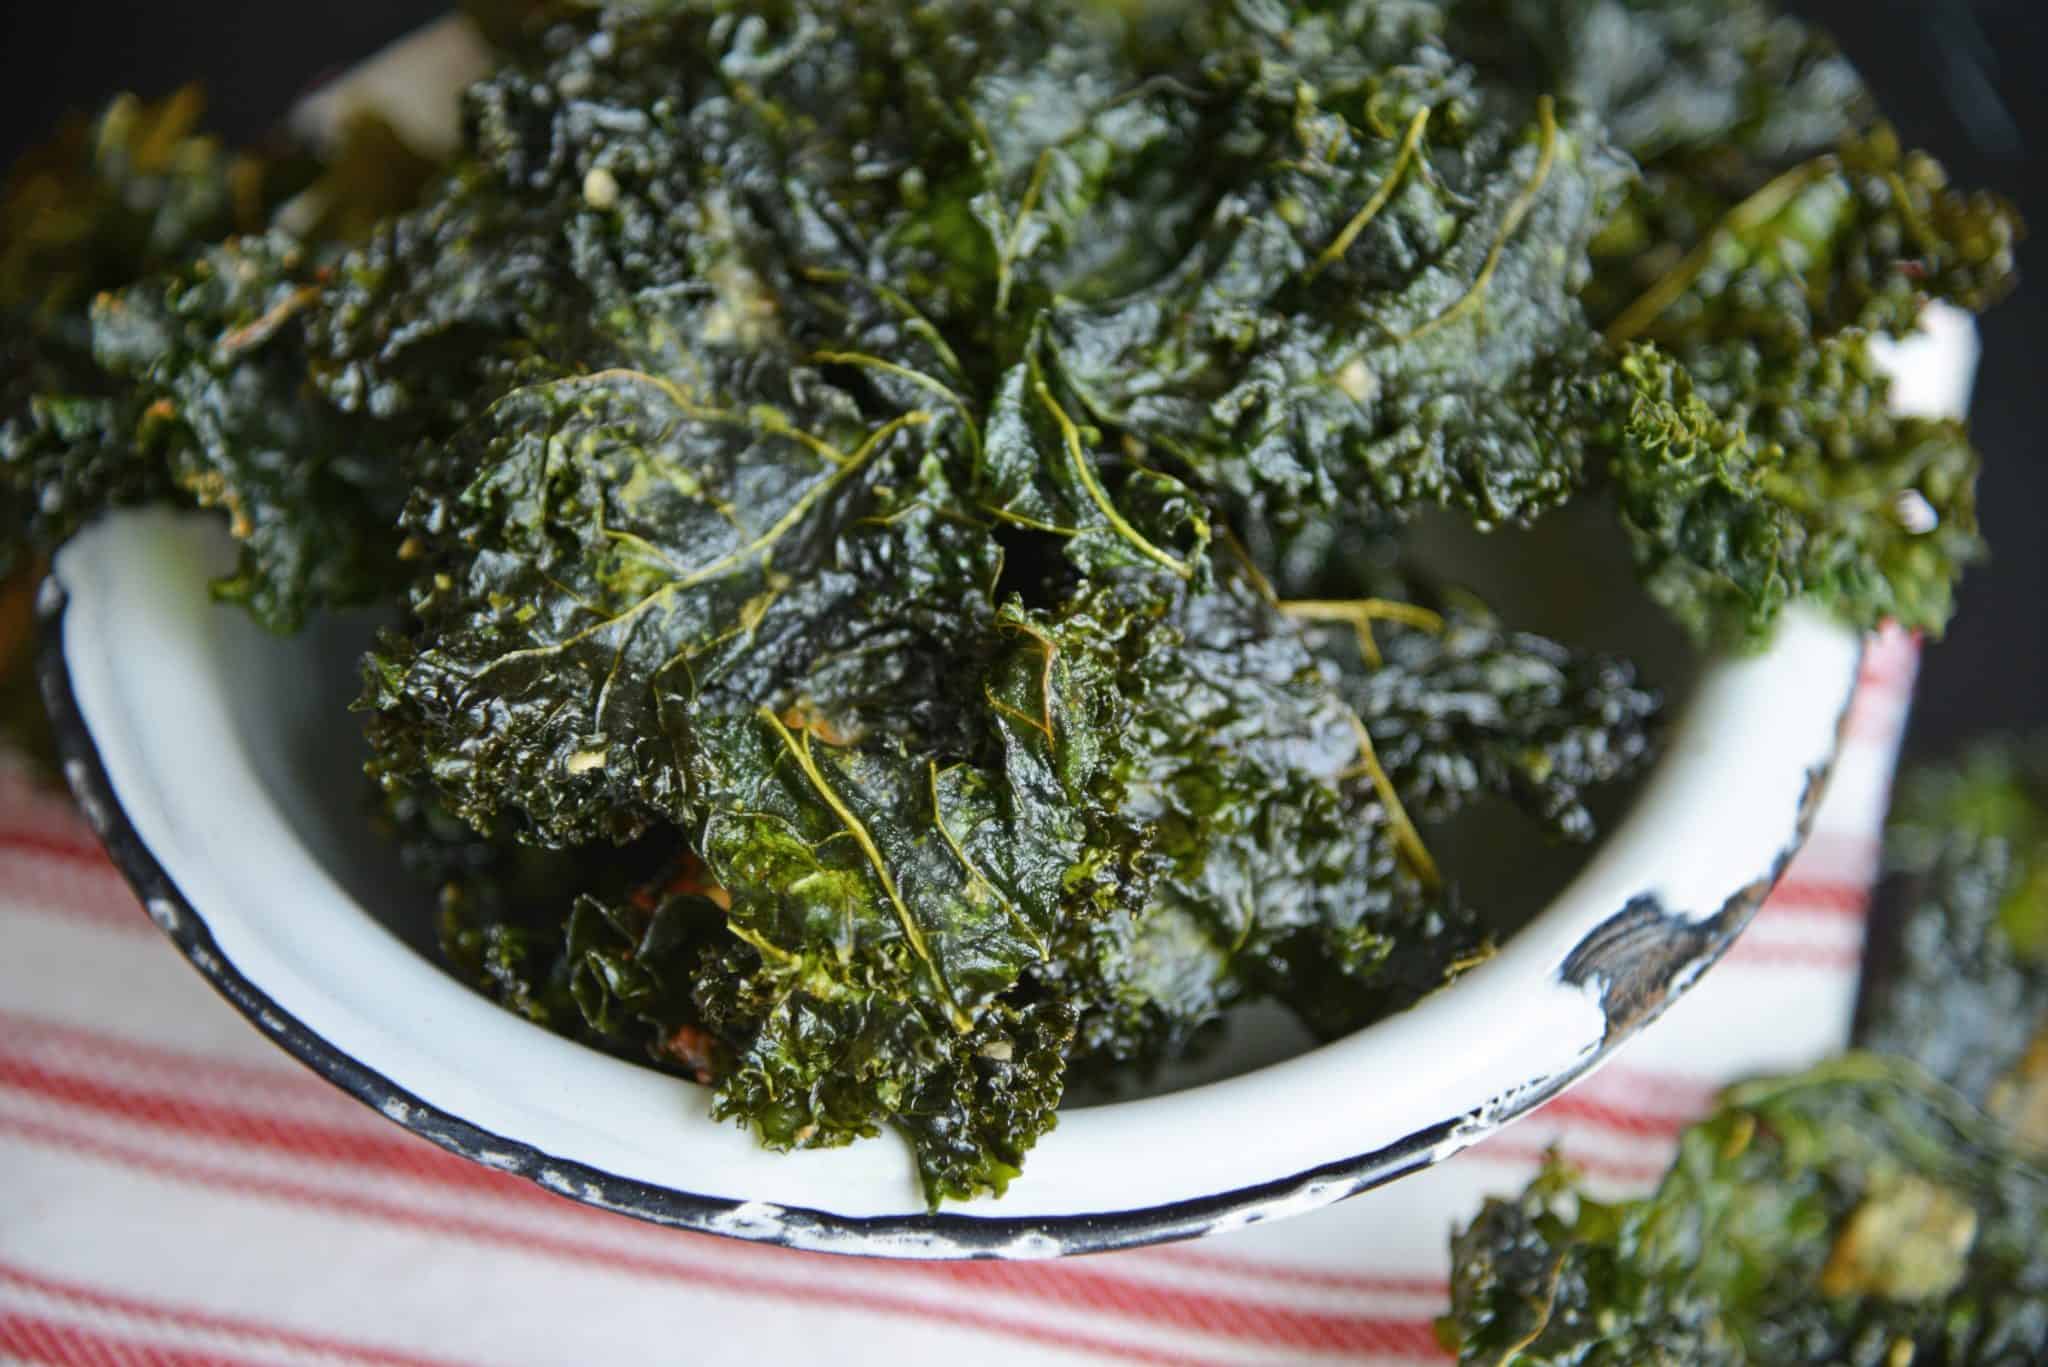 Ranch Kale Chips are a quick and easy 3 ingredient kale chips recipe that offer a tasty and healthy alternative to other chips and snacks. #ranchkalechips #kalechipsrecipe www.savoryexperiments.com